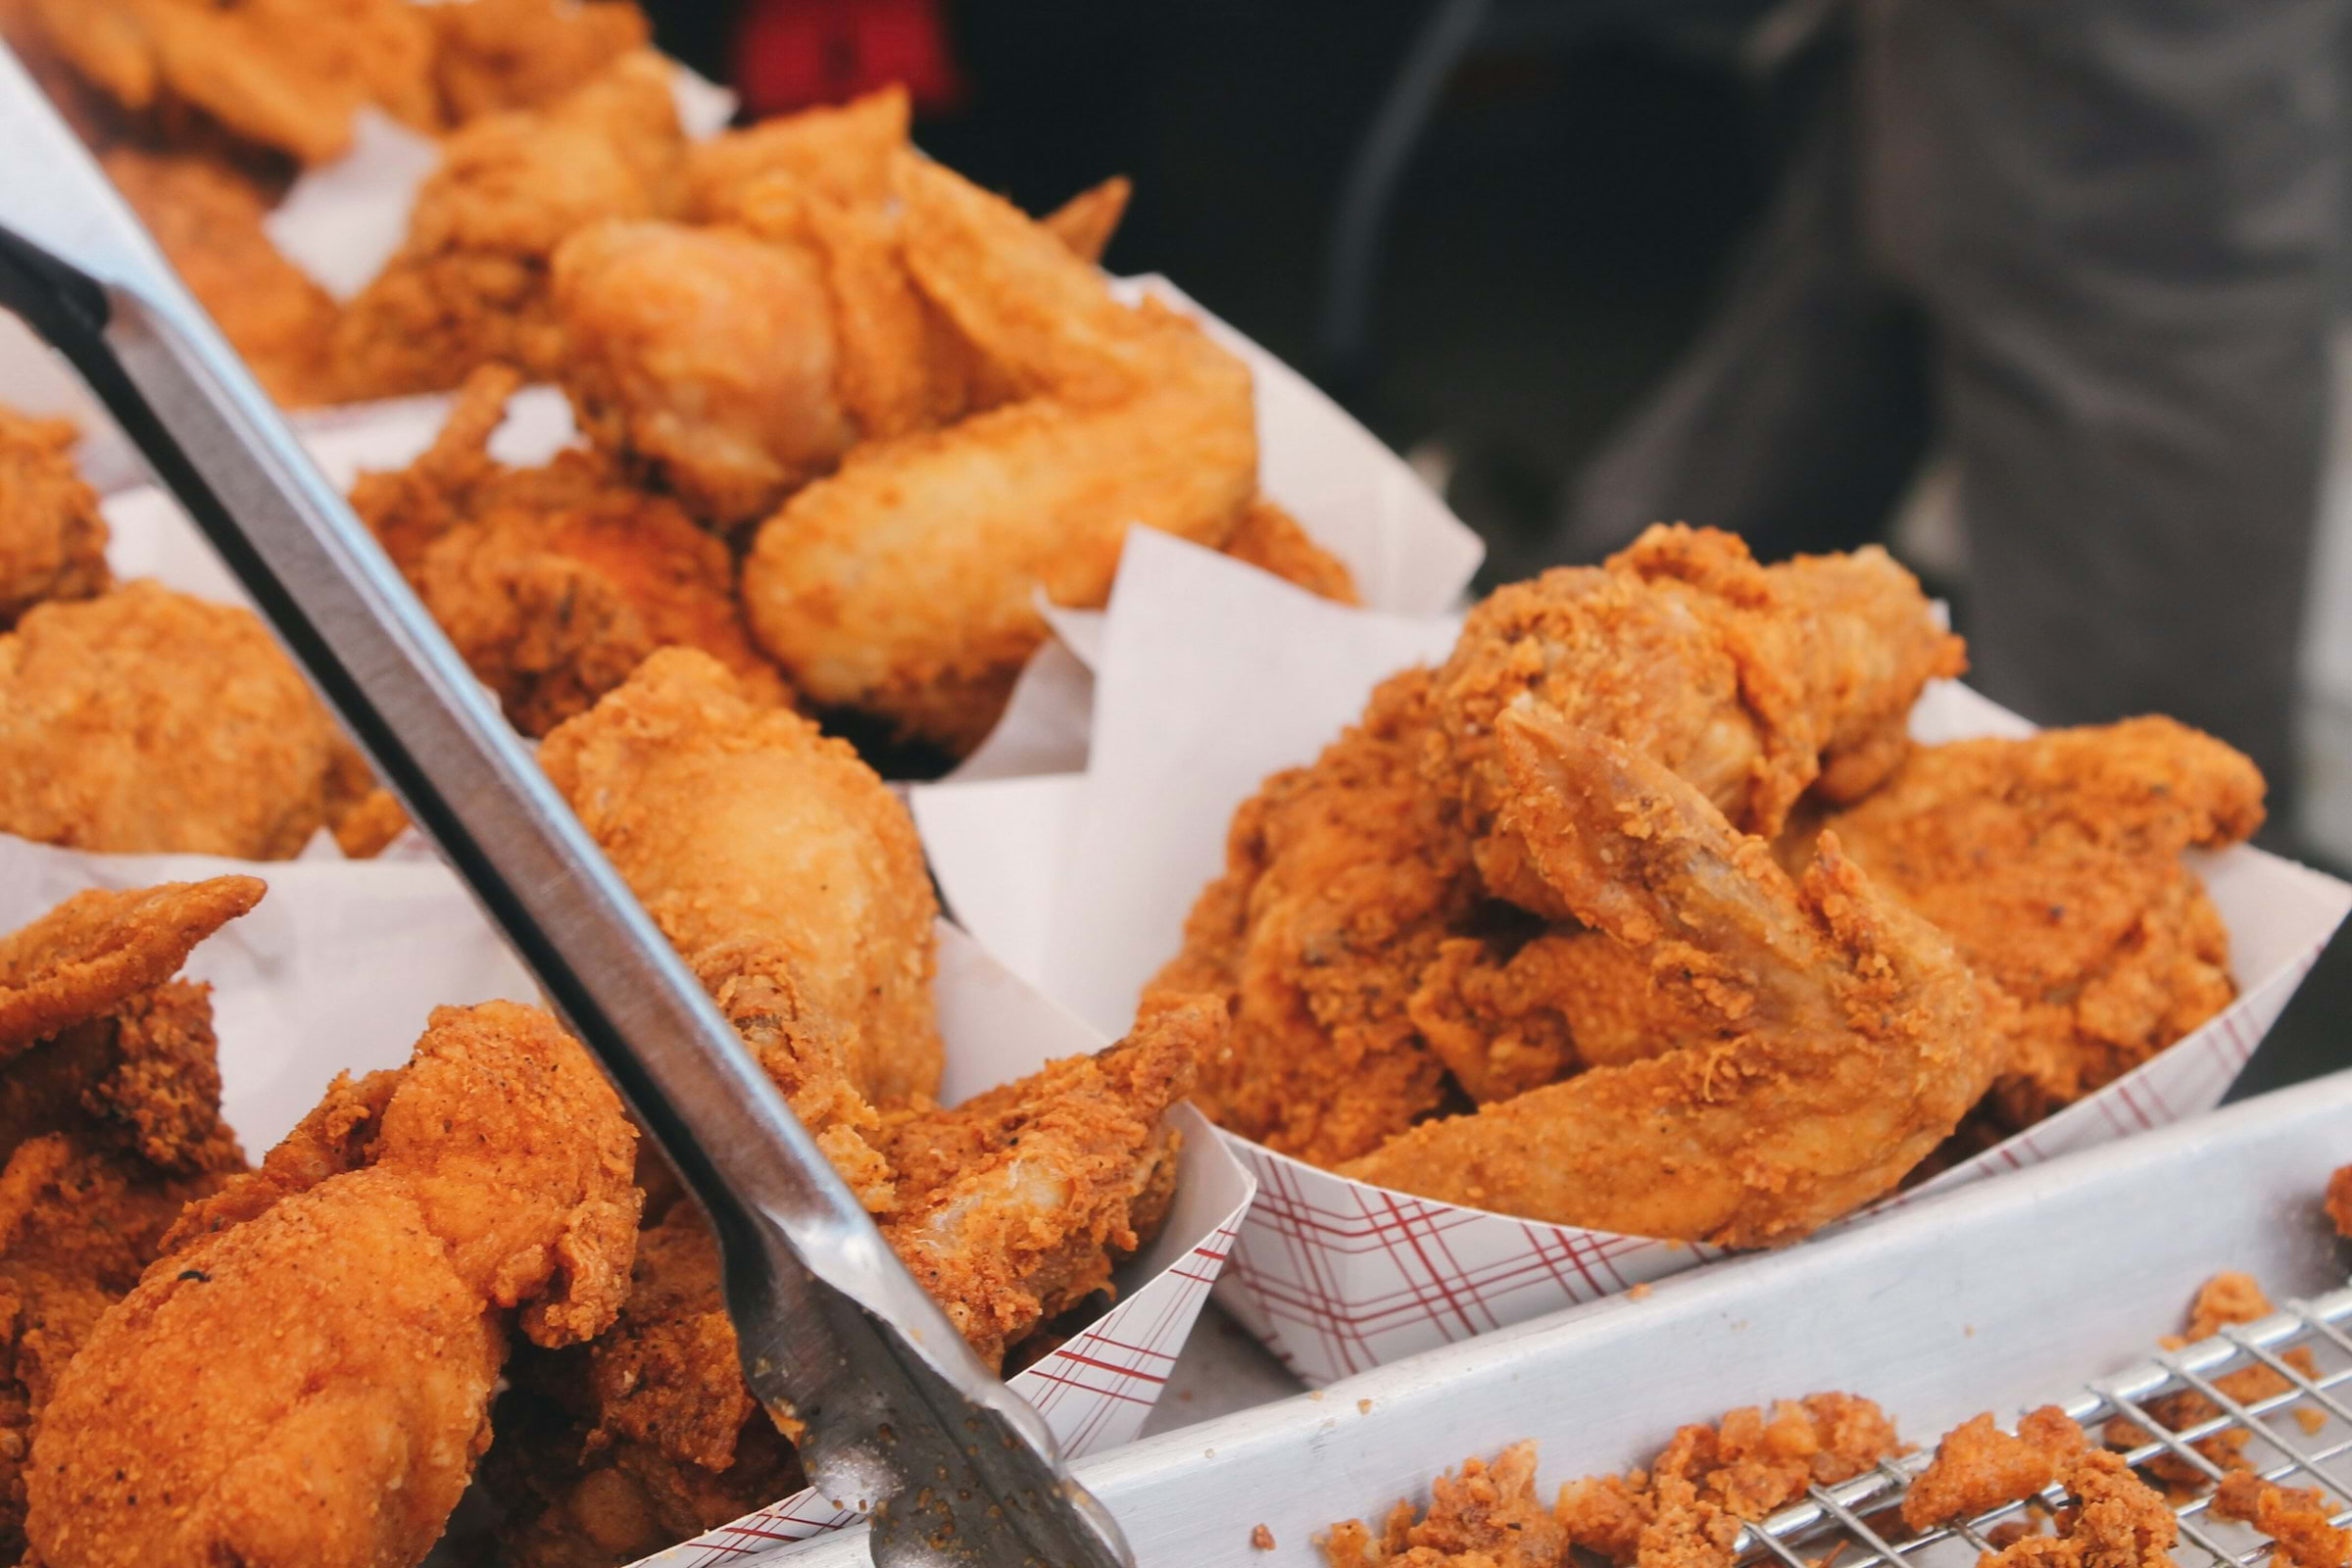 The world's largest chicken wing festival returns to London this weekend